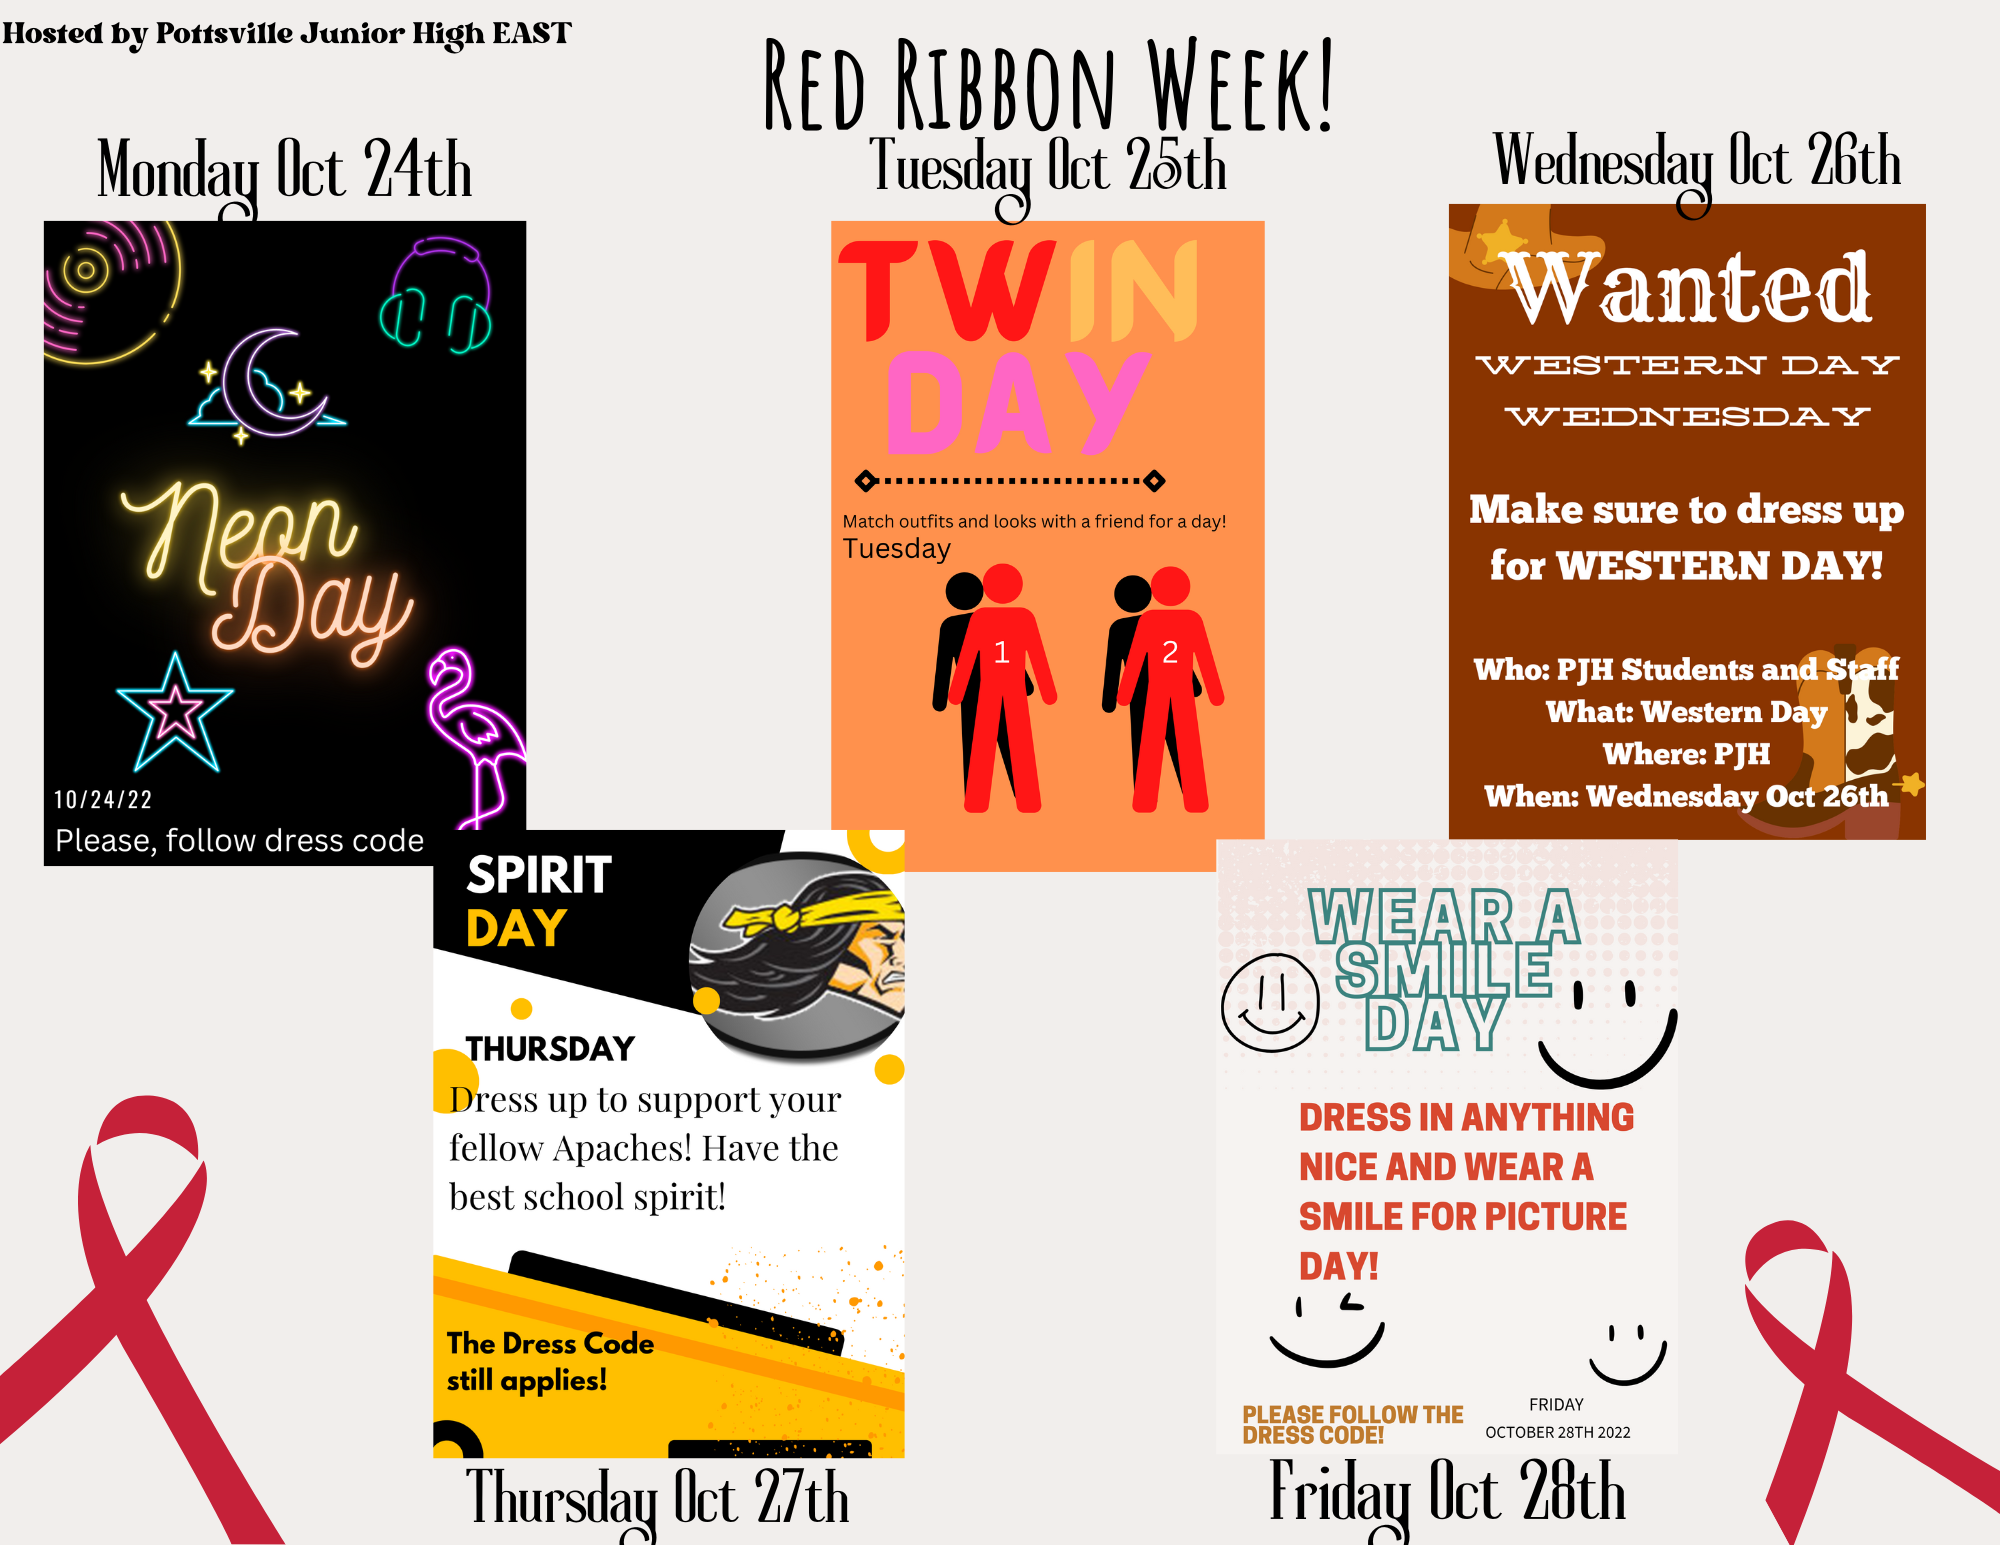 Red Ribbon Week is Tuesday, Oct. 25th Dress-up days - please follow the dress code!